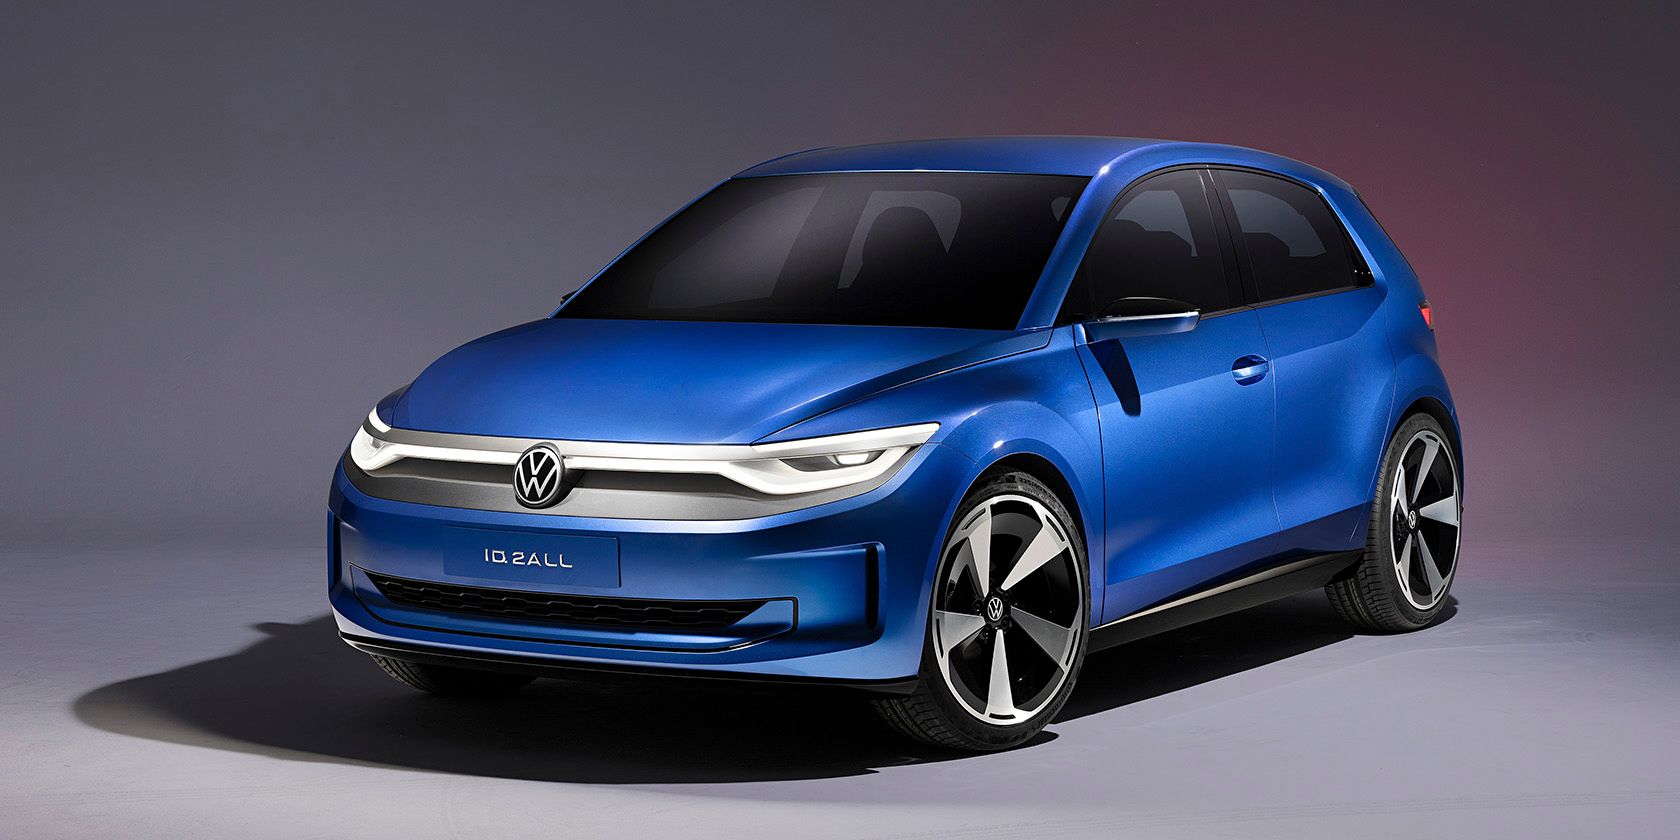 Volkswagen ID.2All Concept front three-quarter view